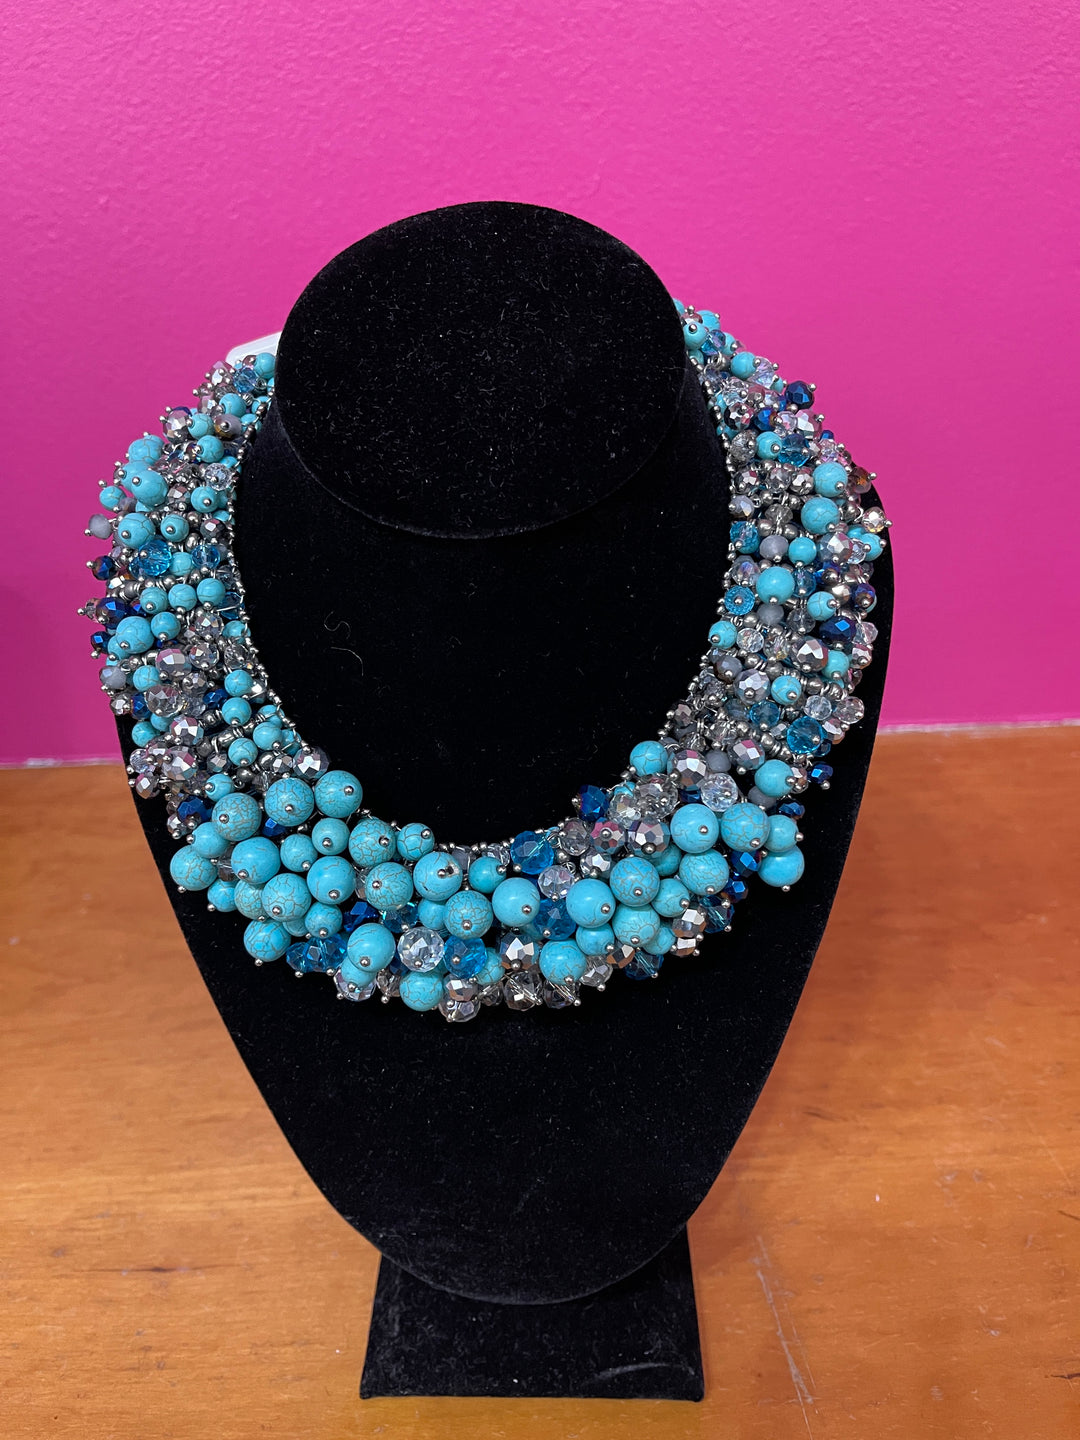 Crystal beads necklace